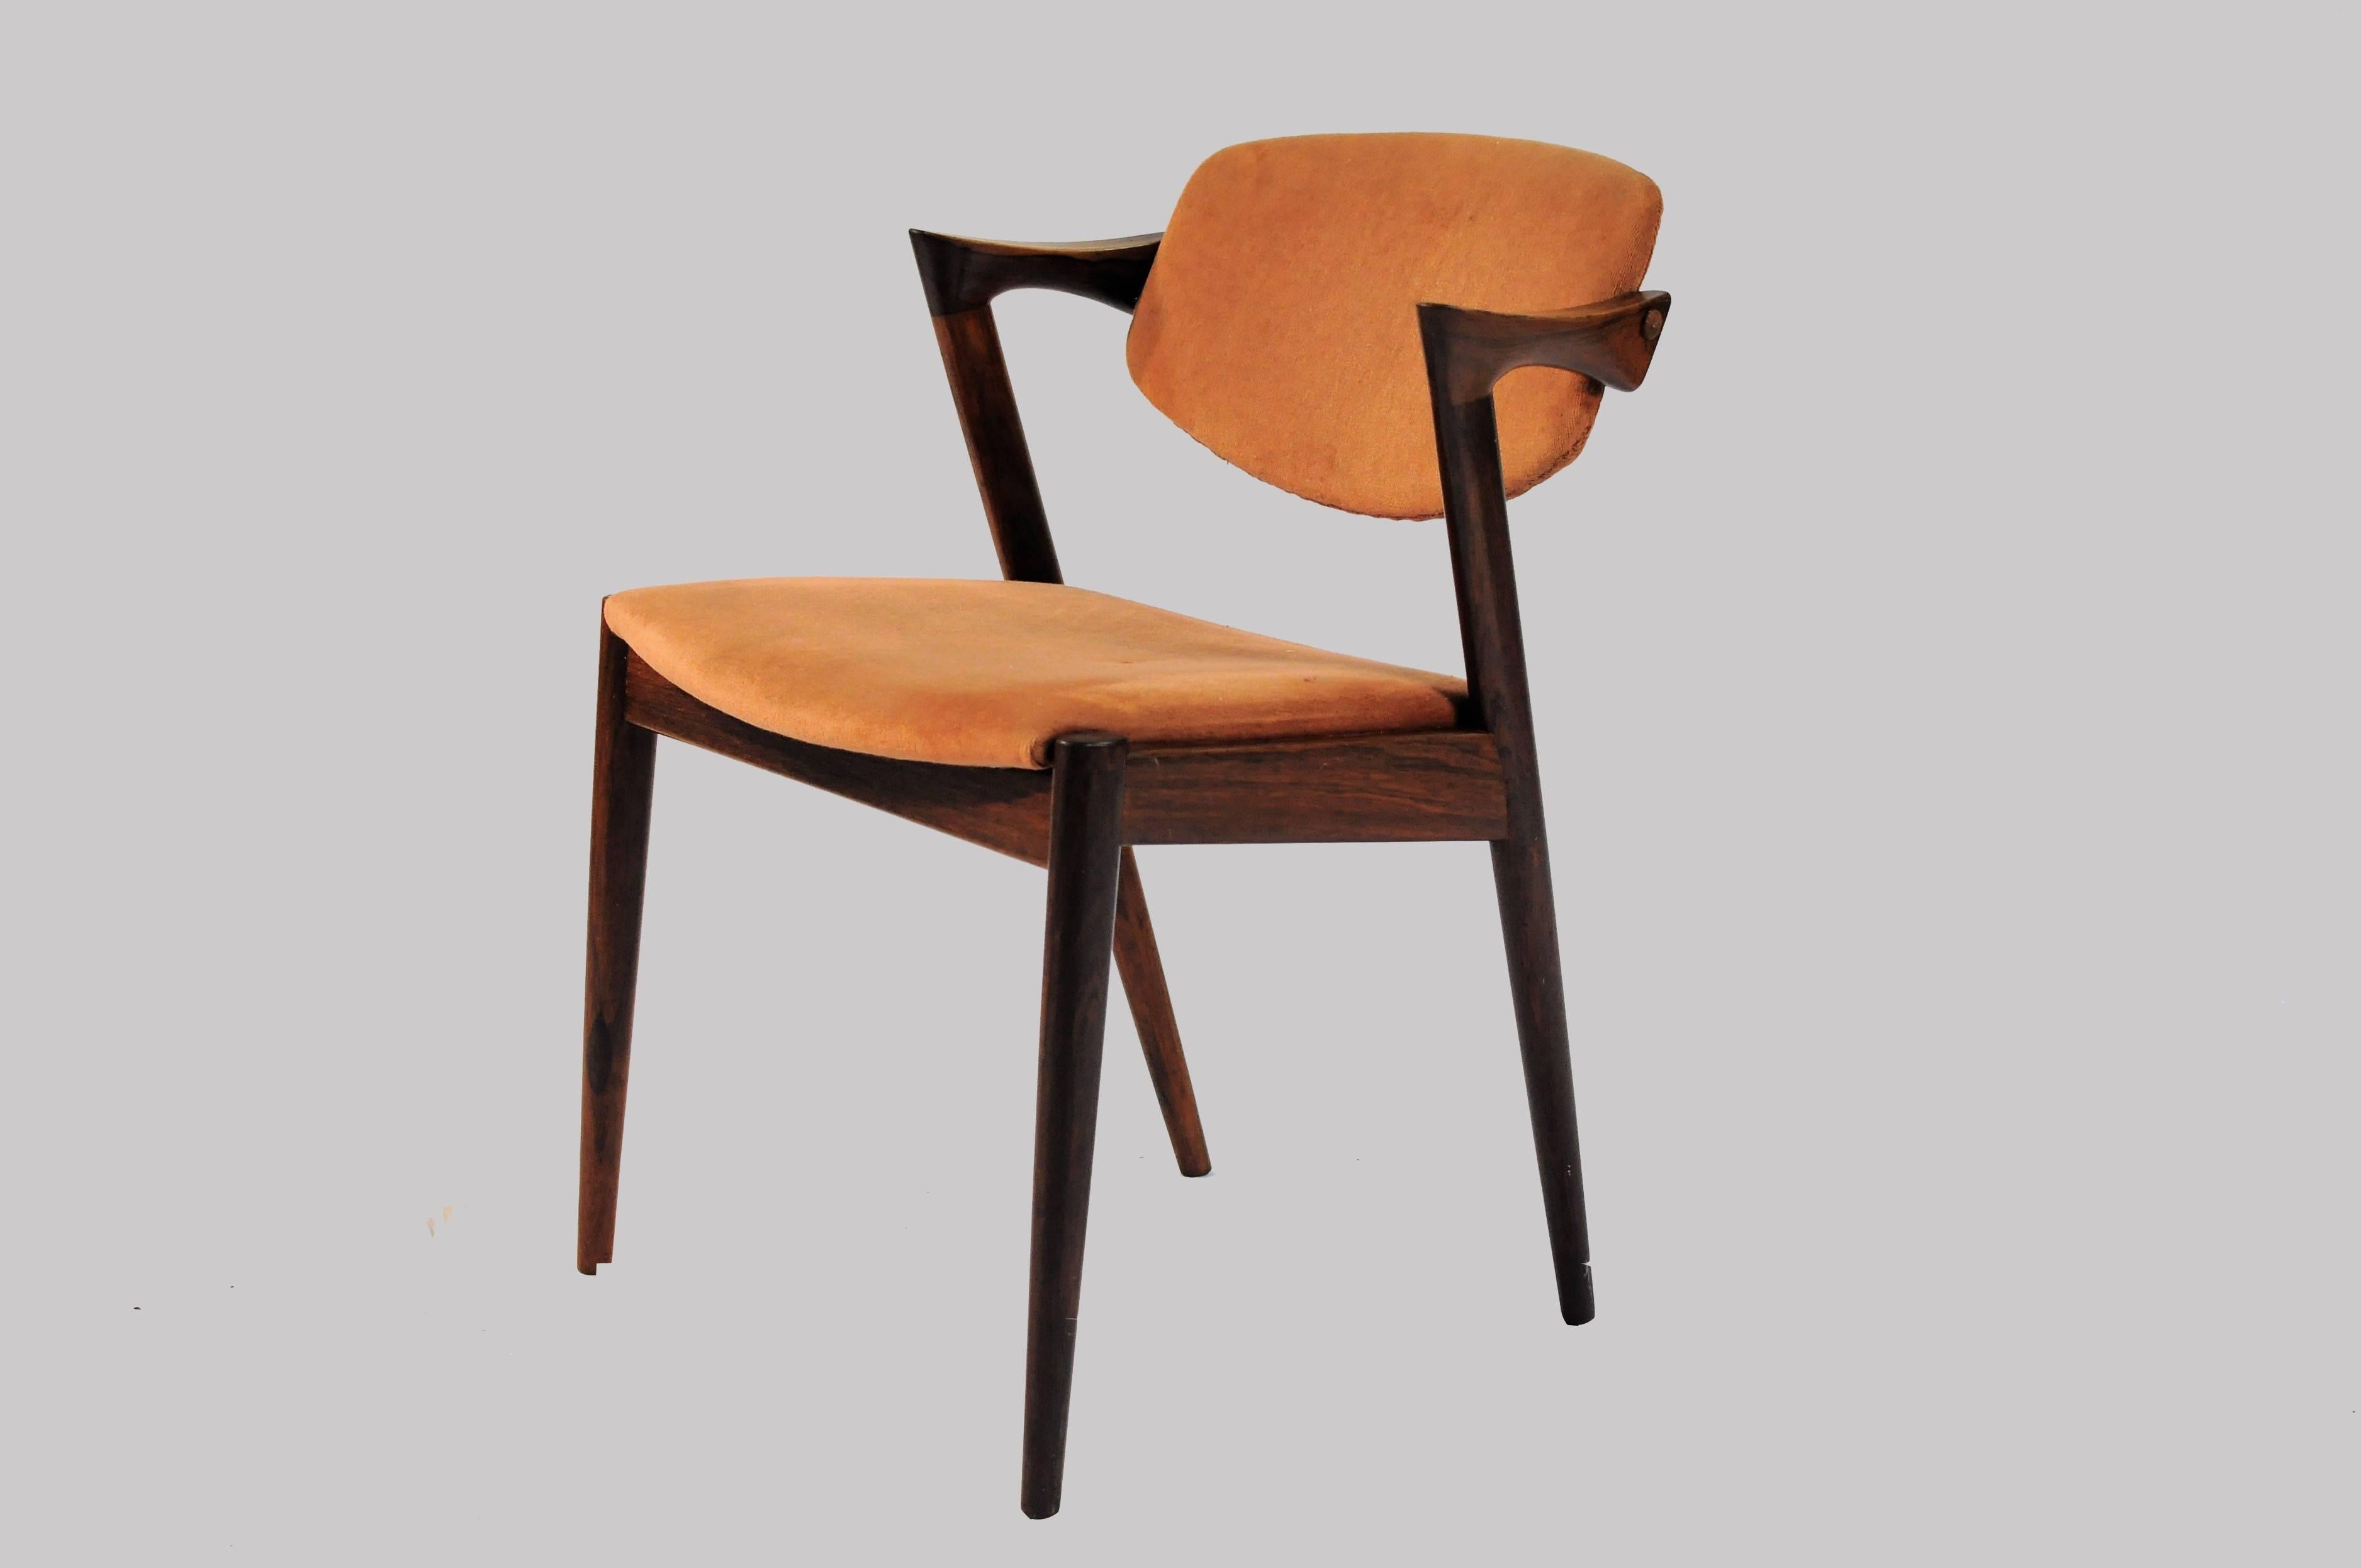 Set of twelve fully restored, 1960s rosewood dining chairs by Kai Kristiansen for Schous Møbelfabrik.

The chairs have Kai Kristiansens typical light and elegant design that make them fit in easily where you want them in your home - a design that